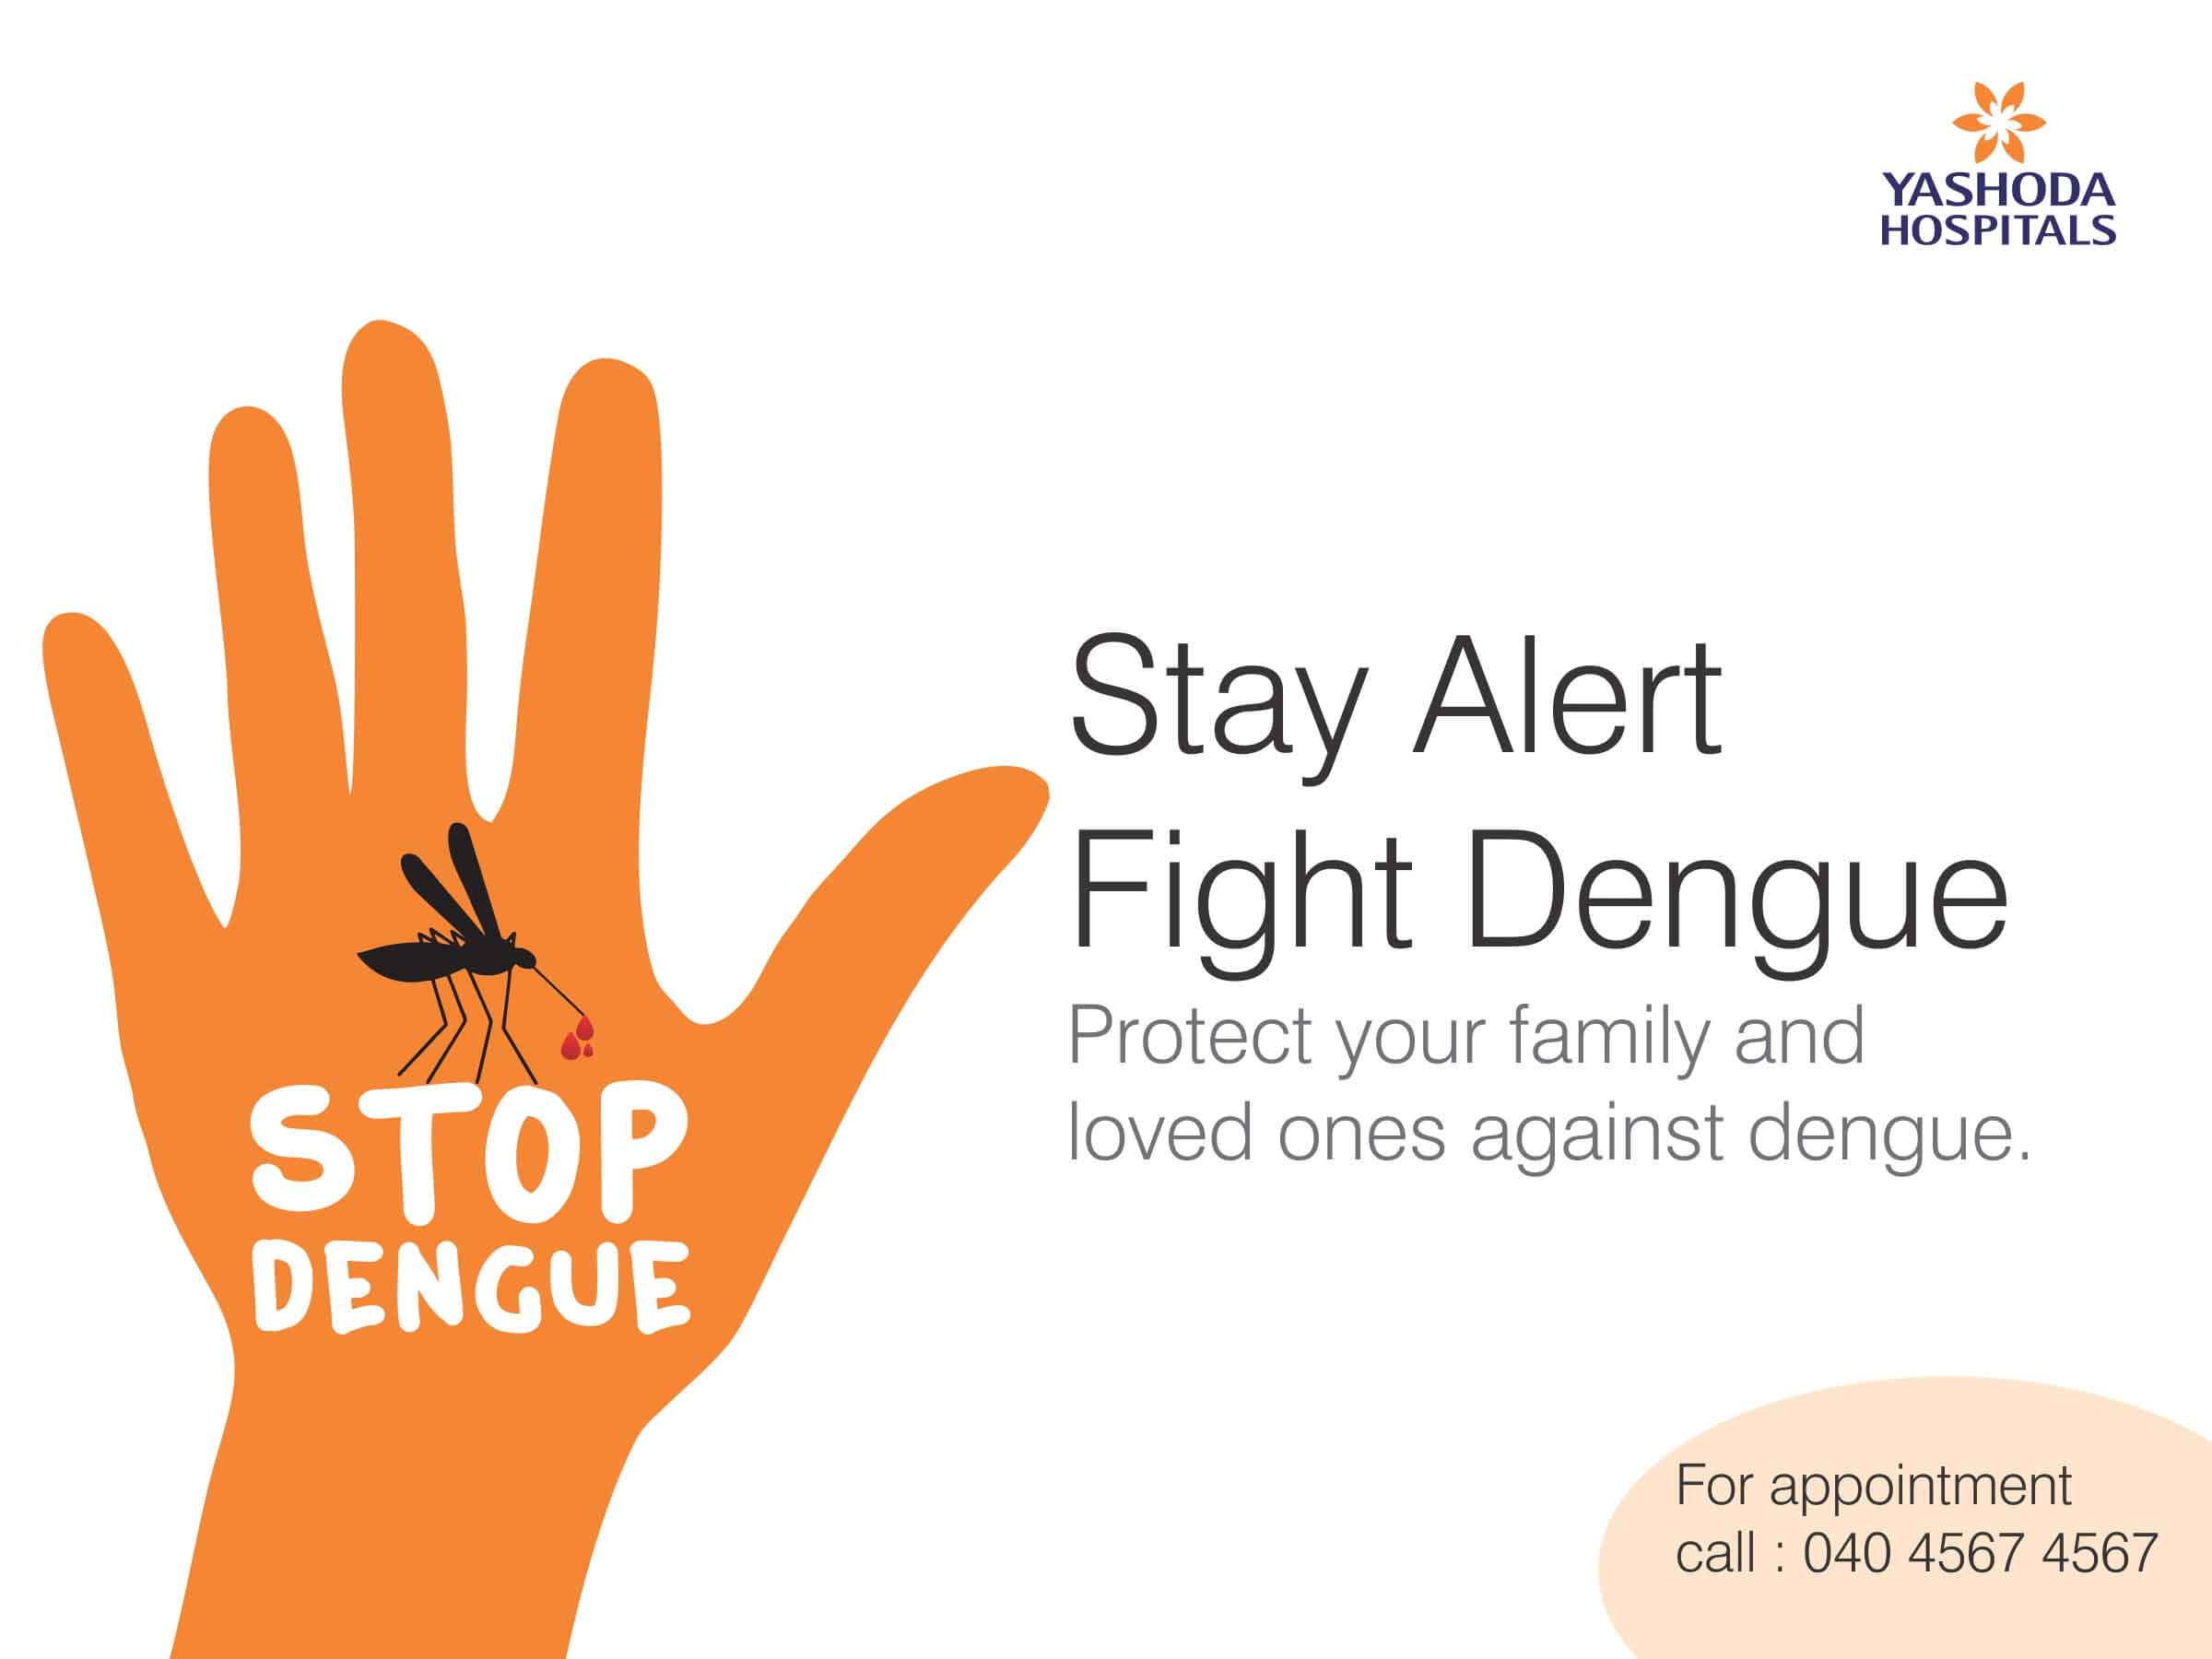 Dengue on the prowl